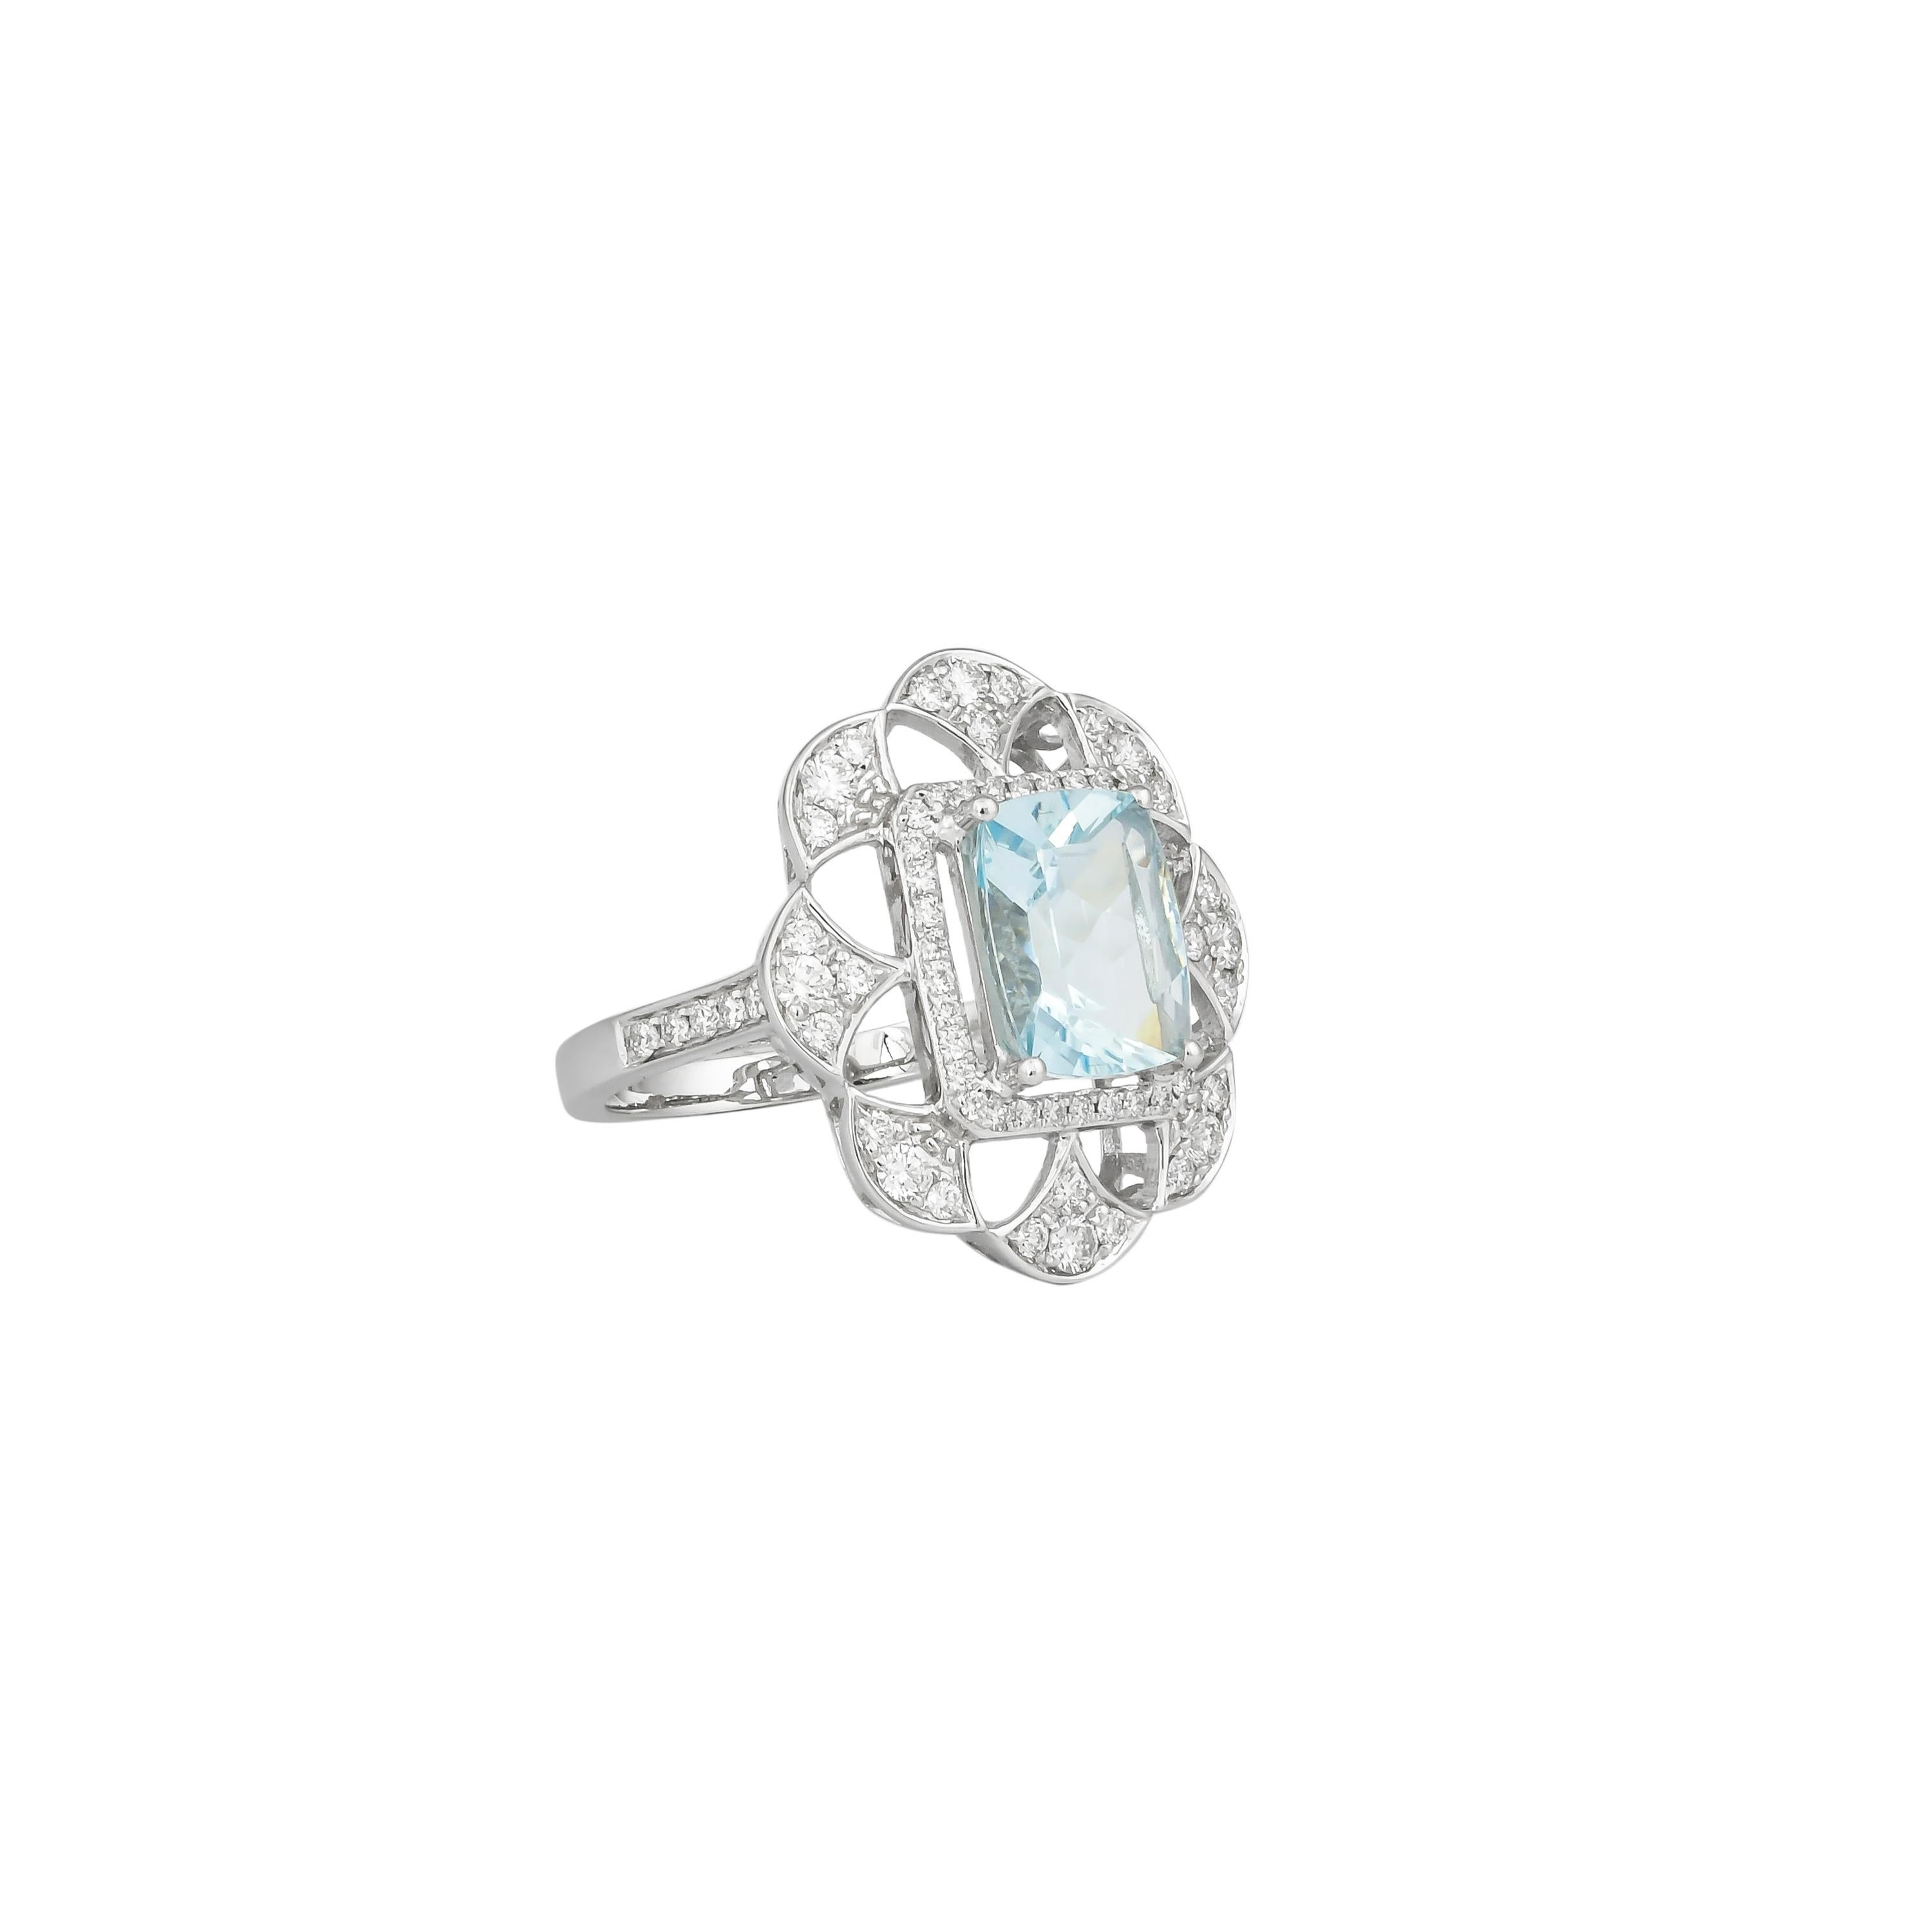 This collection features an array of aquamarines with an icy blue hue that is as cool as it gets! Accented with diamonds these rings are made in white and present a classic yet elegant look. 

Classic aquamarine ring in 18K white gold with diamonds.